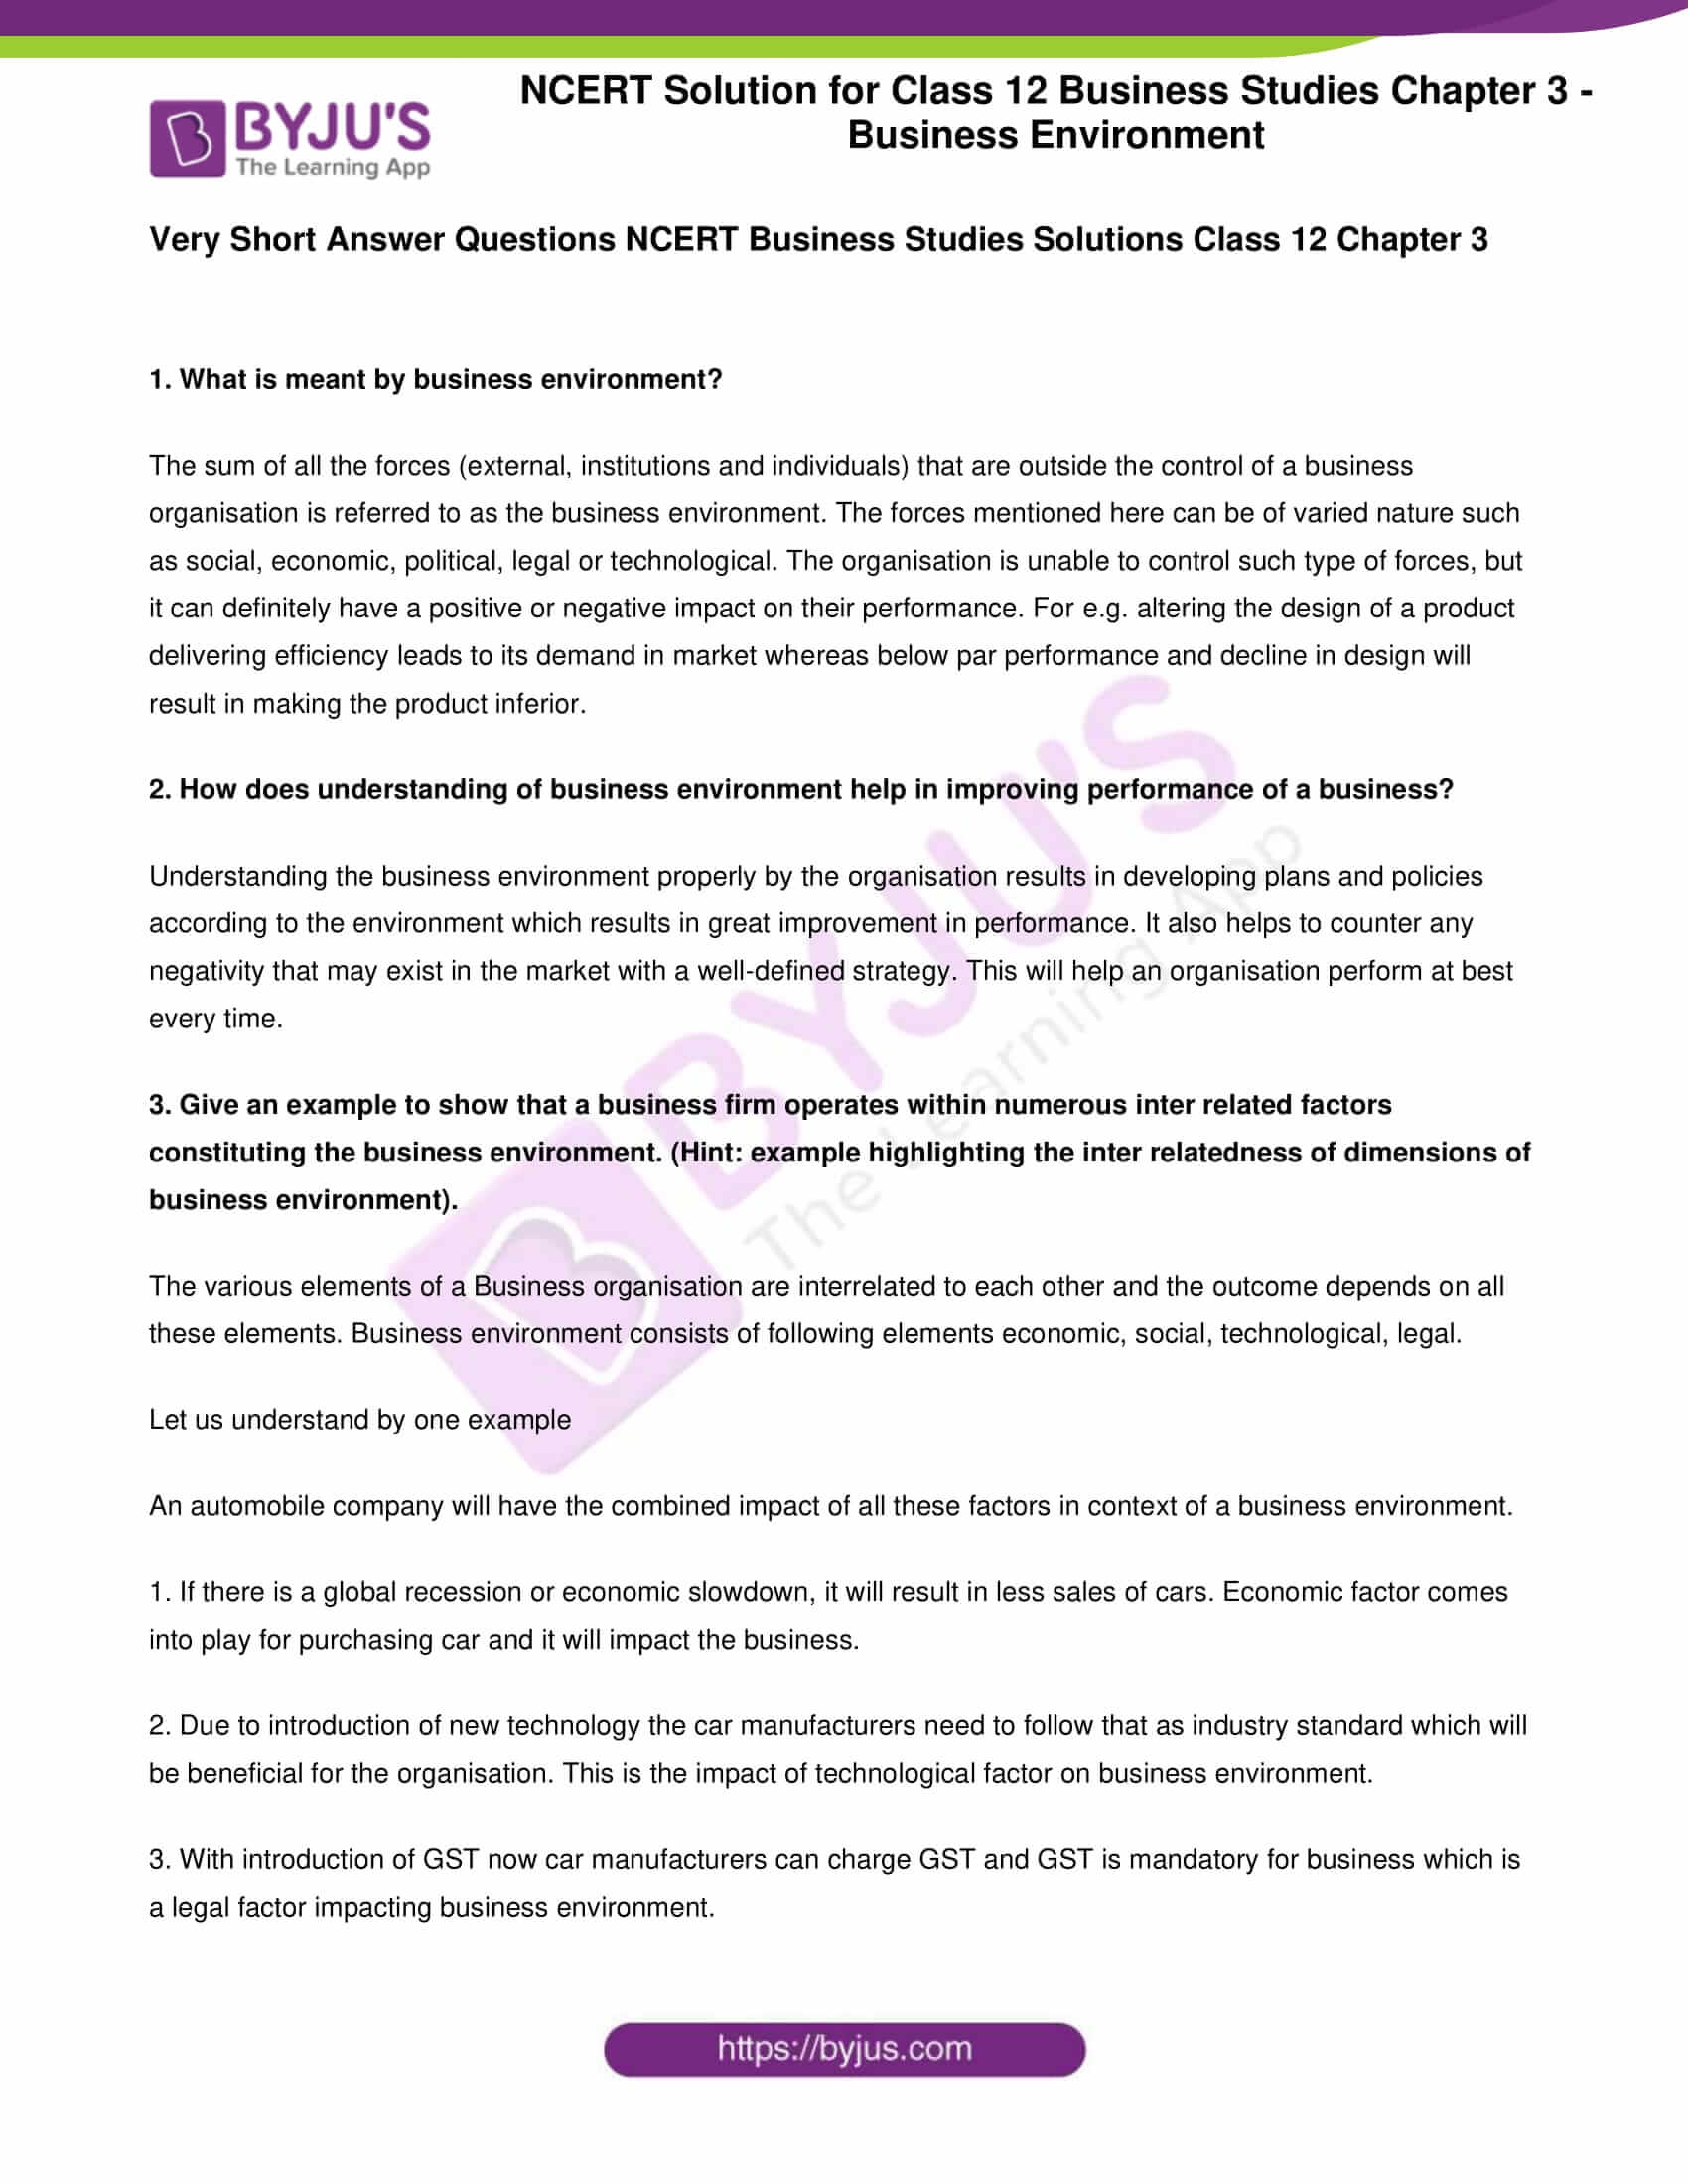 ncert-solution-for-class-12-business-studies-chapter-3-business-environment-download-pdf-math